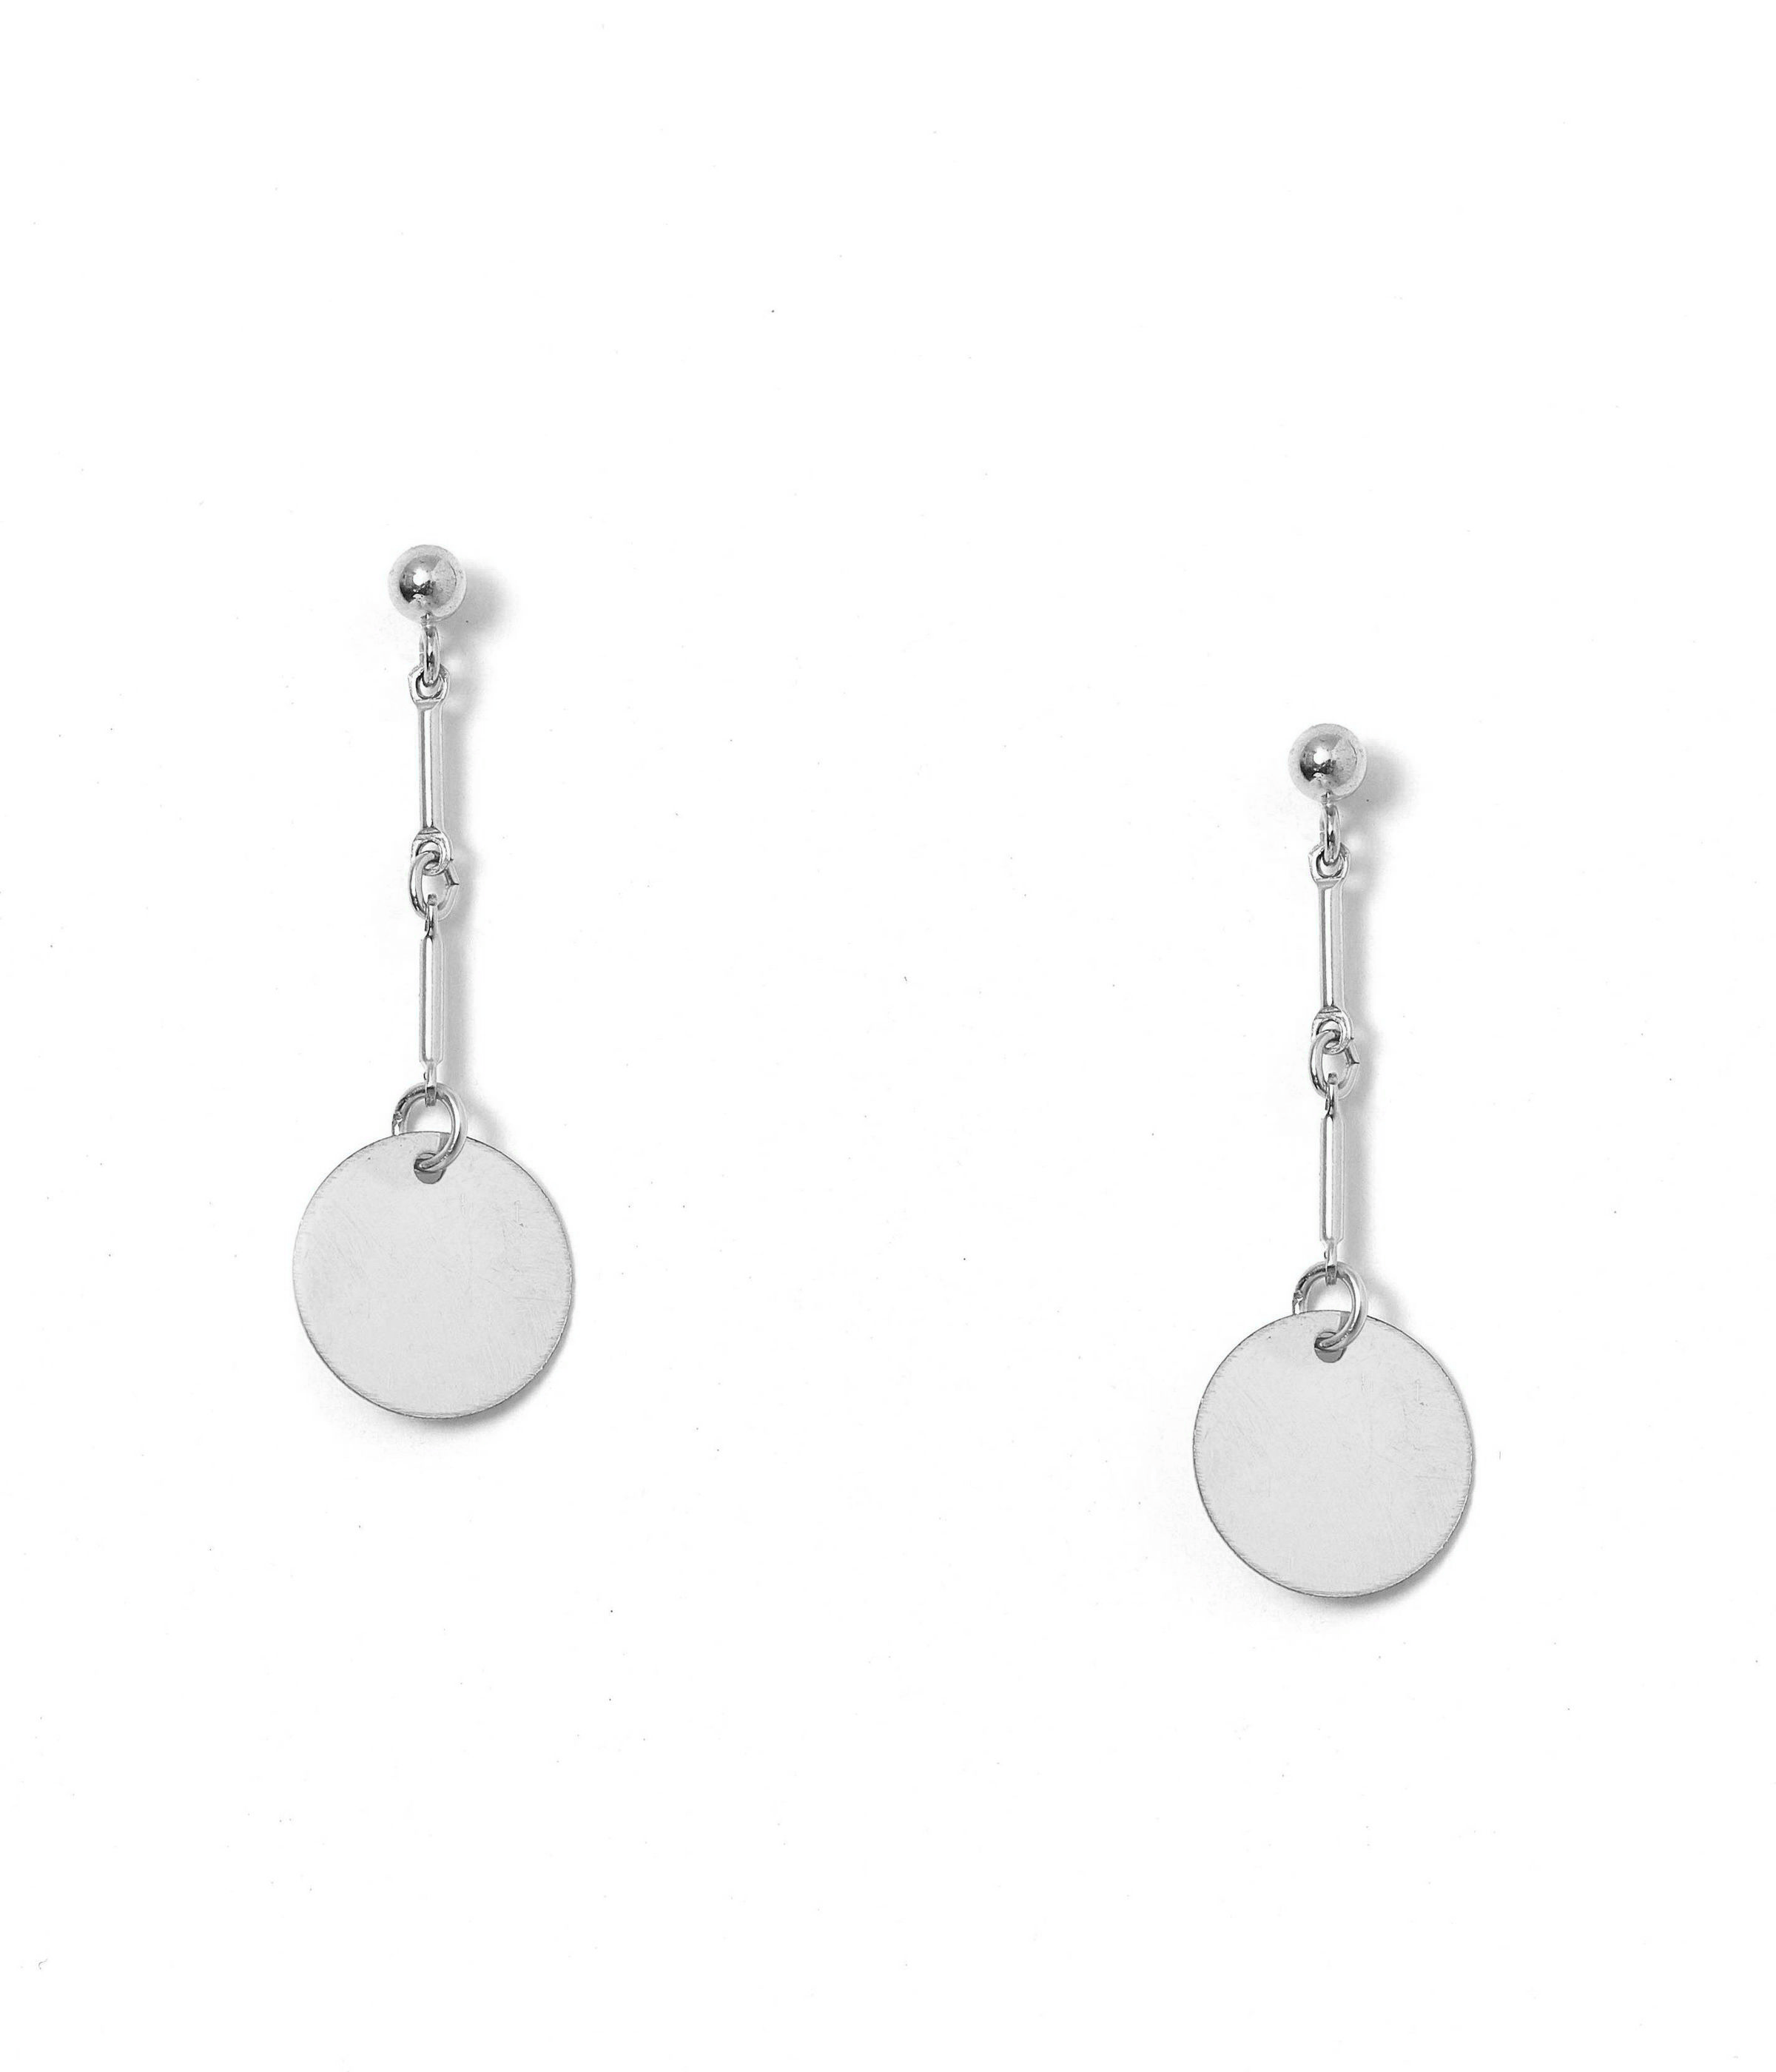 Desos Earrings by KOZAKH. 2 inch drop, 3mm Ball stud earrings, crafted in Sterling Silver, featuring a 9mm flat coin charm.